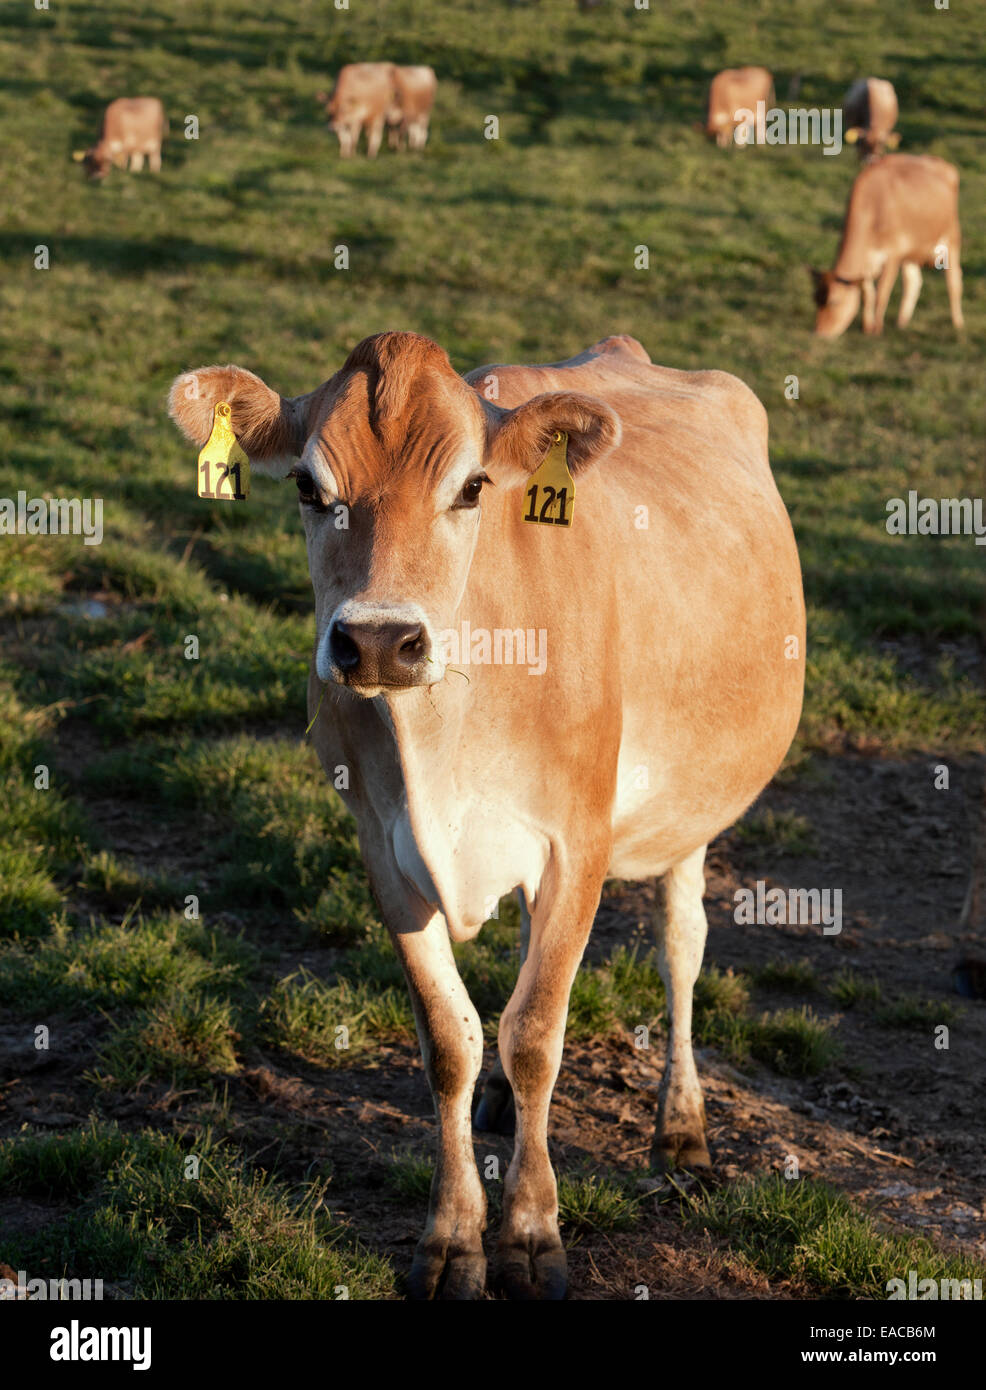 Jersey dairy cow in green pasture. Stock Photo